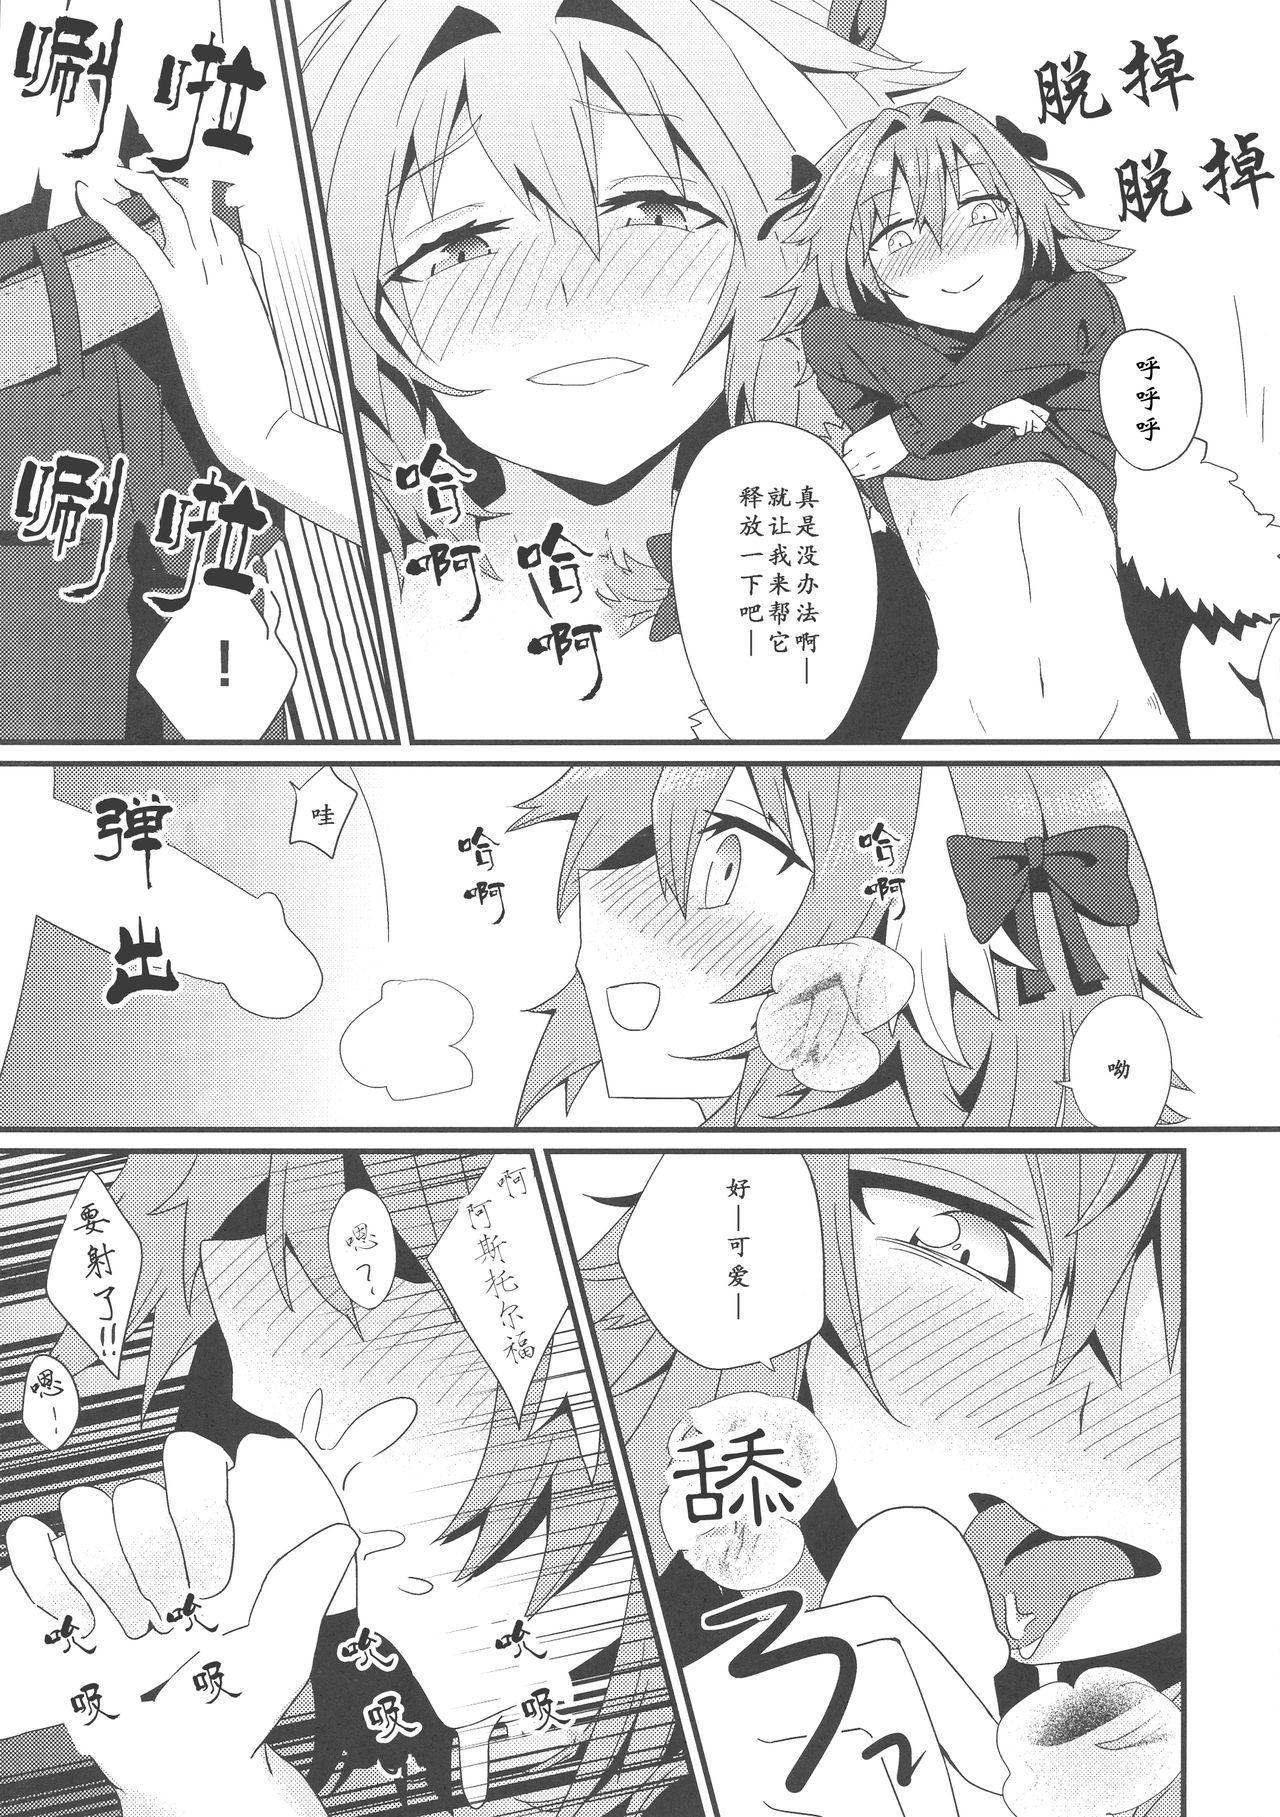 Picked Up Astolfo to Yoru no Chaldea - Fate grand order Romance - Page 10